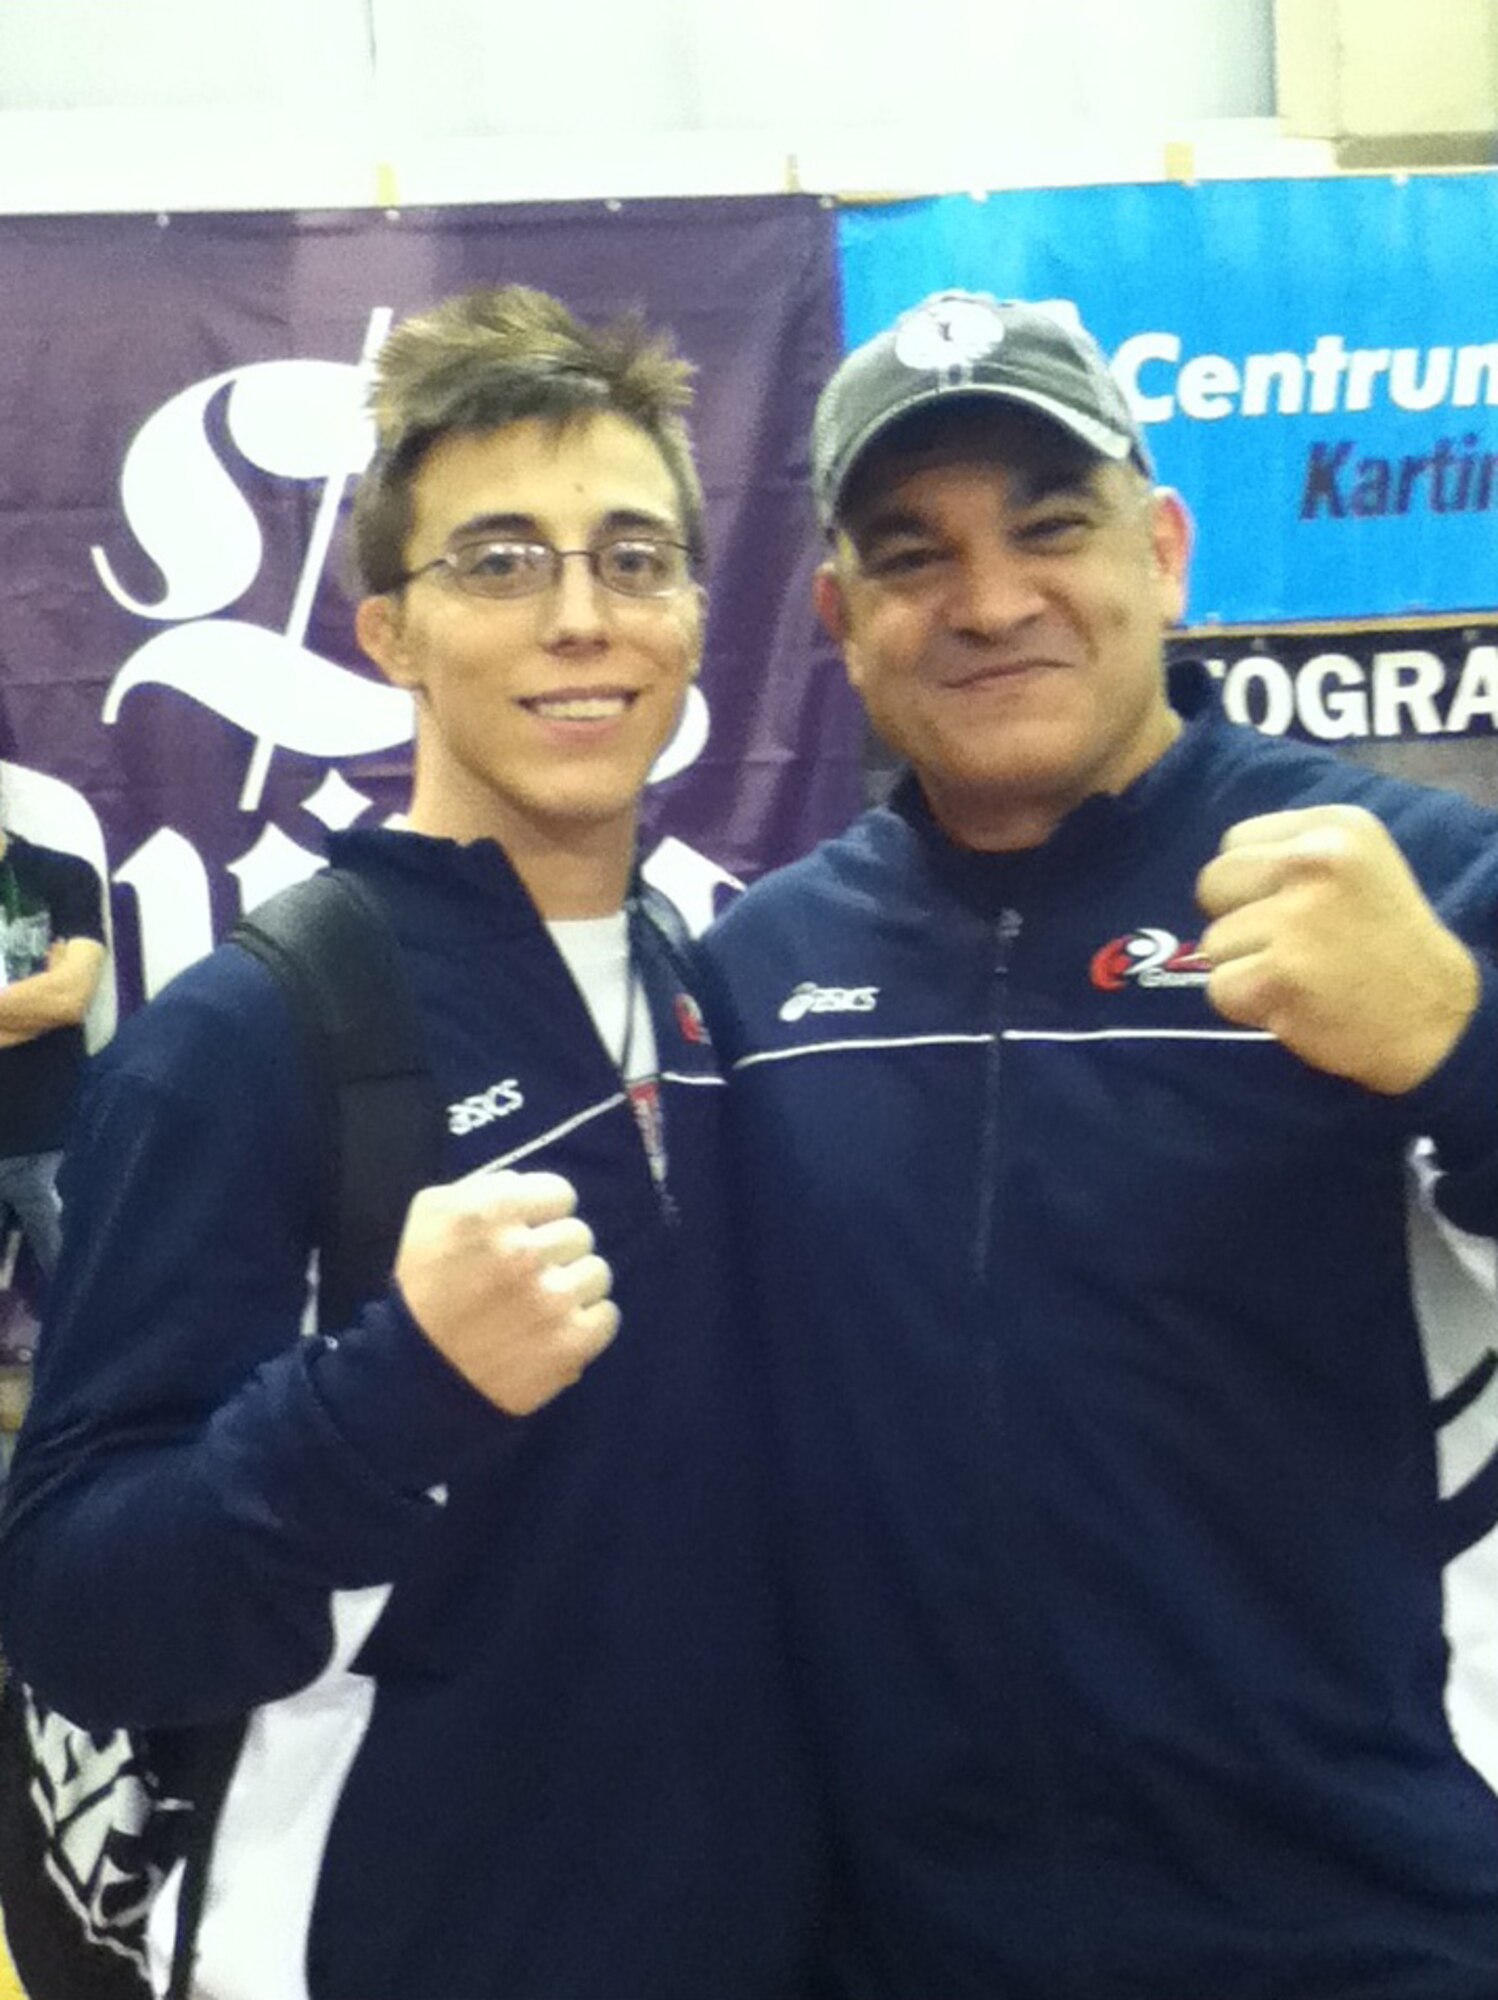 U.S. Air Force Staff Sgt. Ryan Vottero, 355th Security Forces Squadron (Left) poses for a picture with his coach, Ricardo Liborio, during a wrestling tournament in Poland. (Courtesy photo)